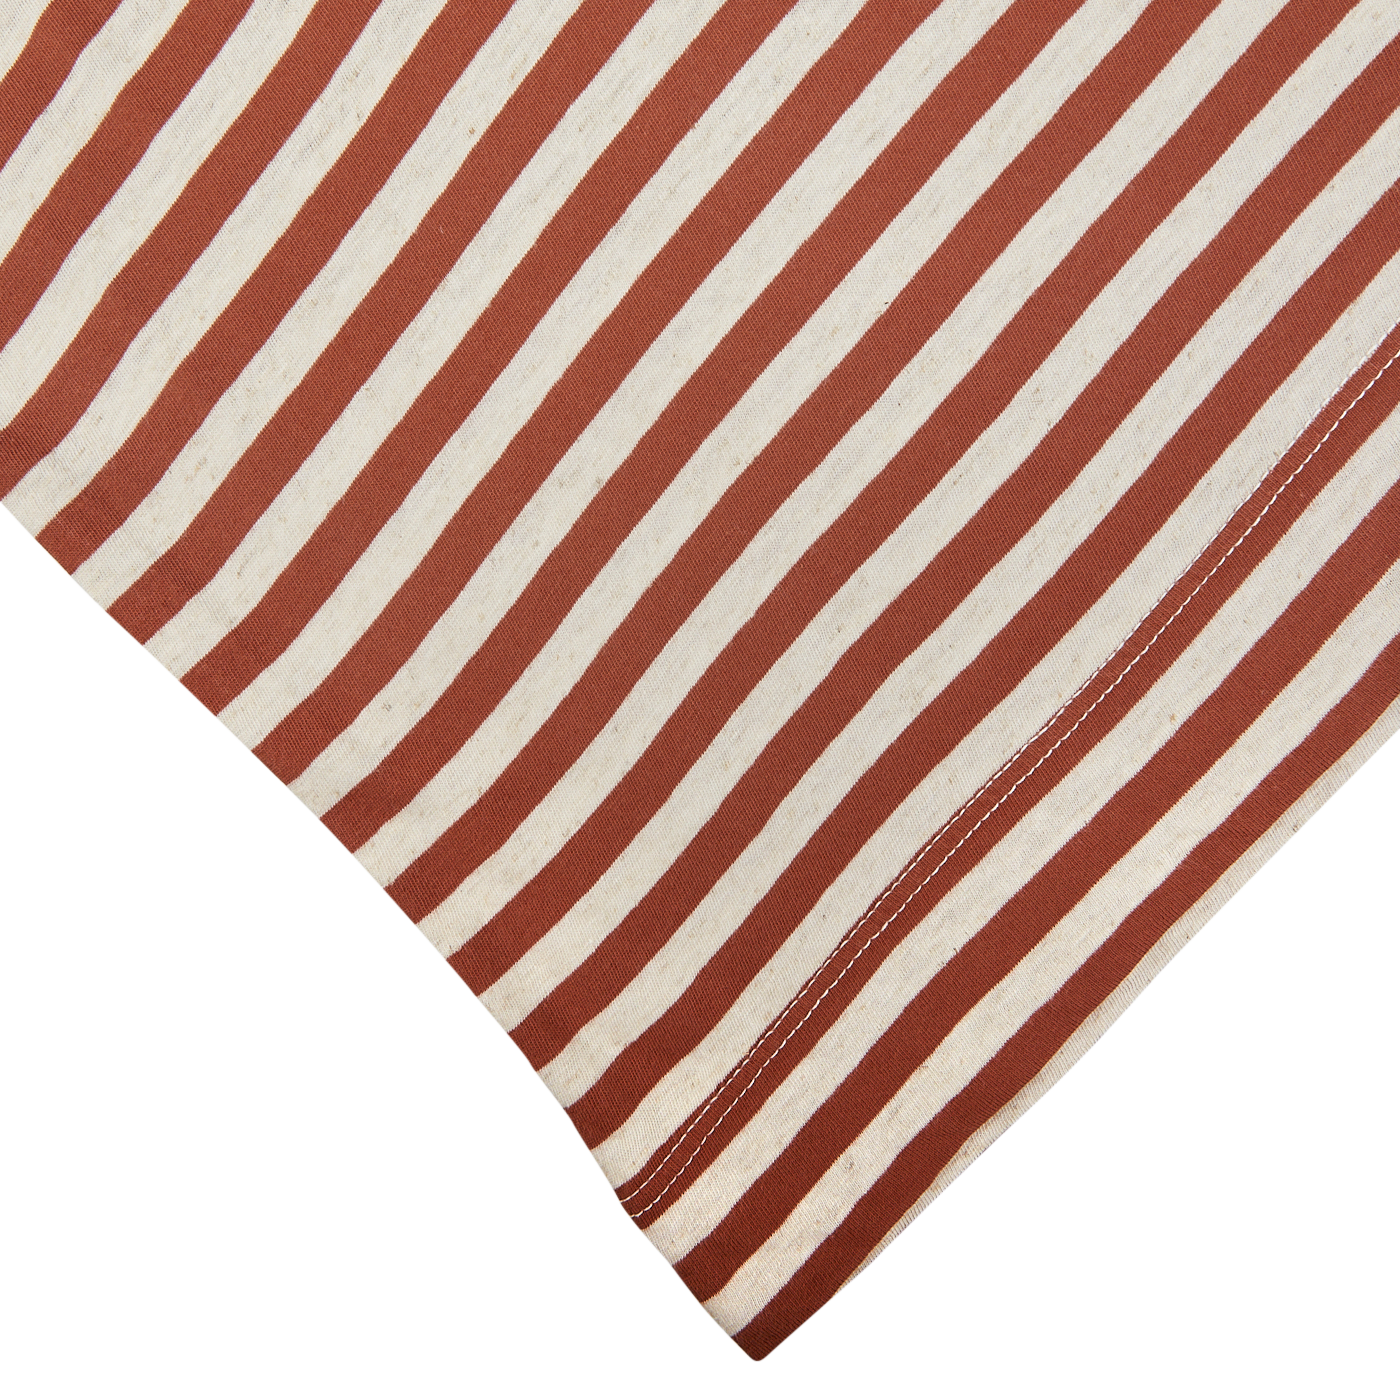 Red and white striped, garment-dyed Rust Brown Striped Cotton Linen T-Shirt fabric diagonally arranged on a white background by Massimo Alba.